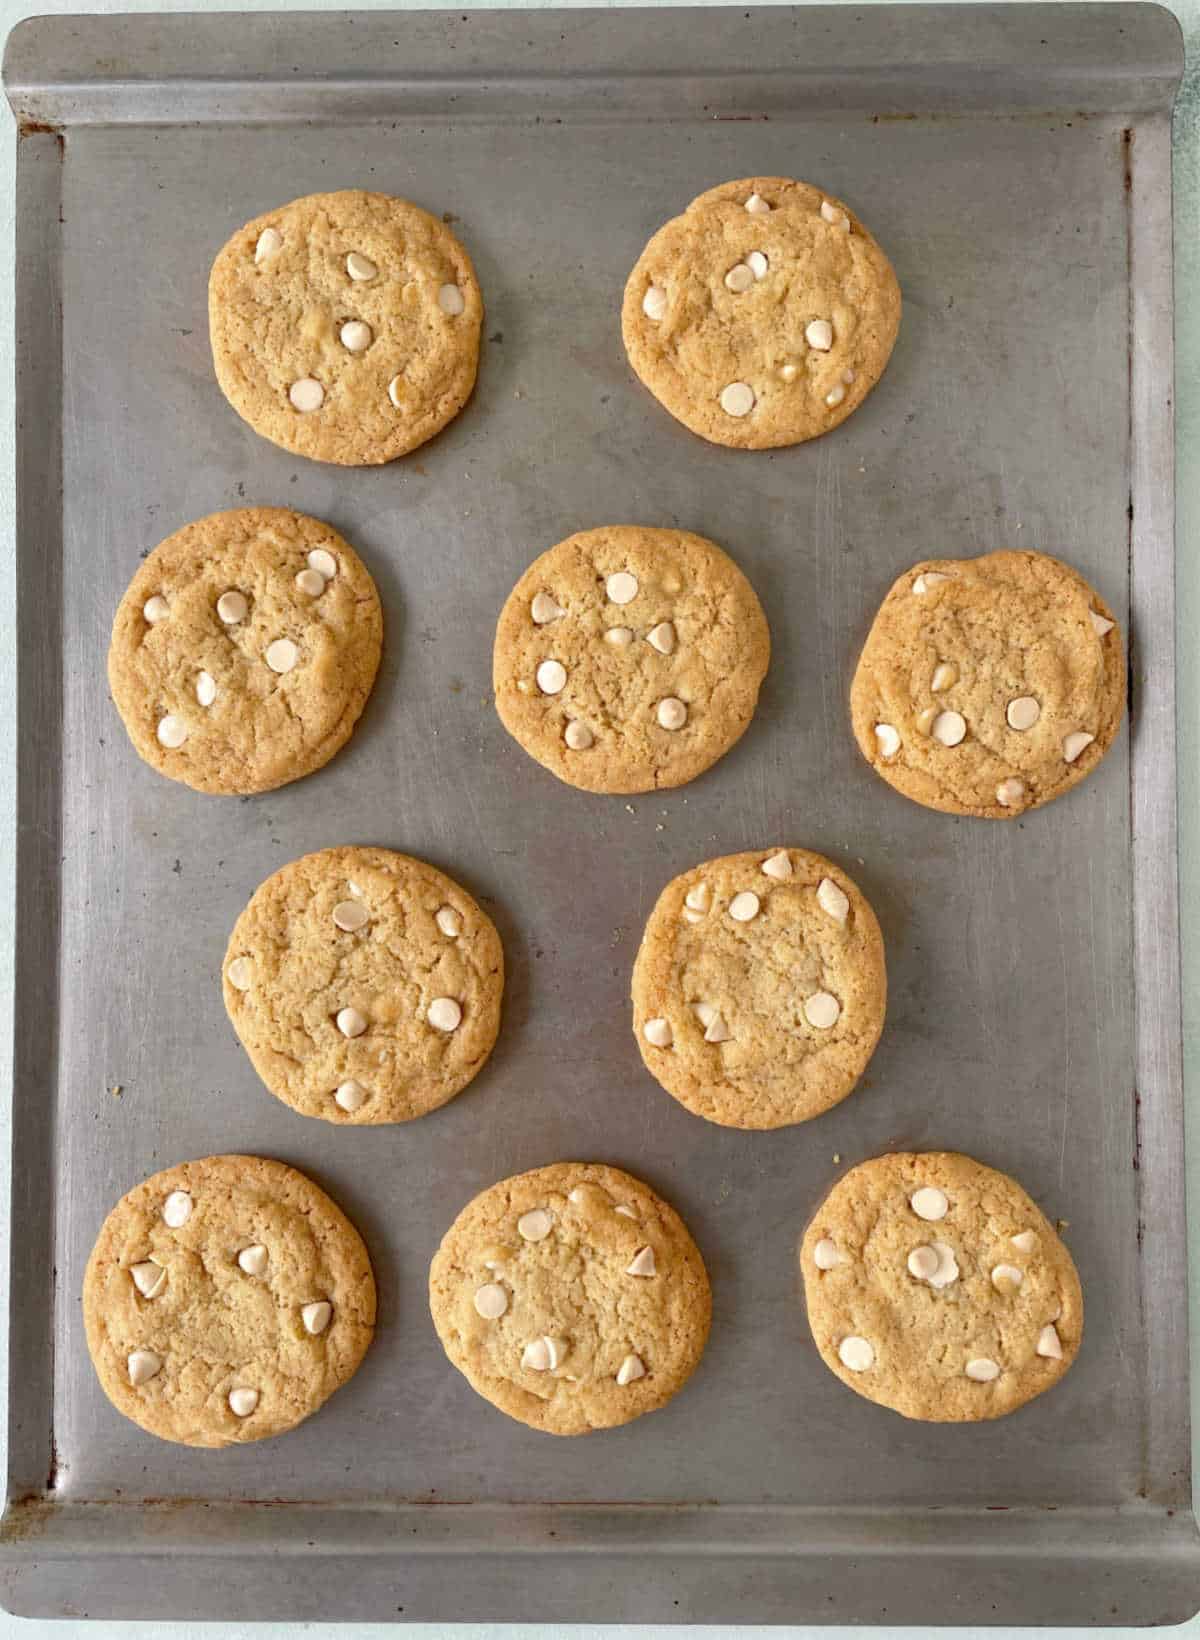 Top view of baked white chocolate chip cookies on metal baking sheet